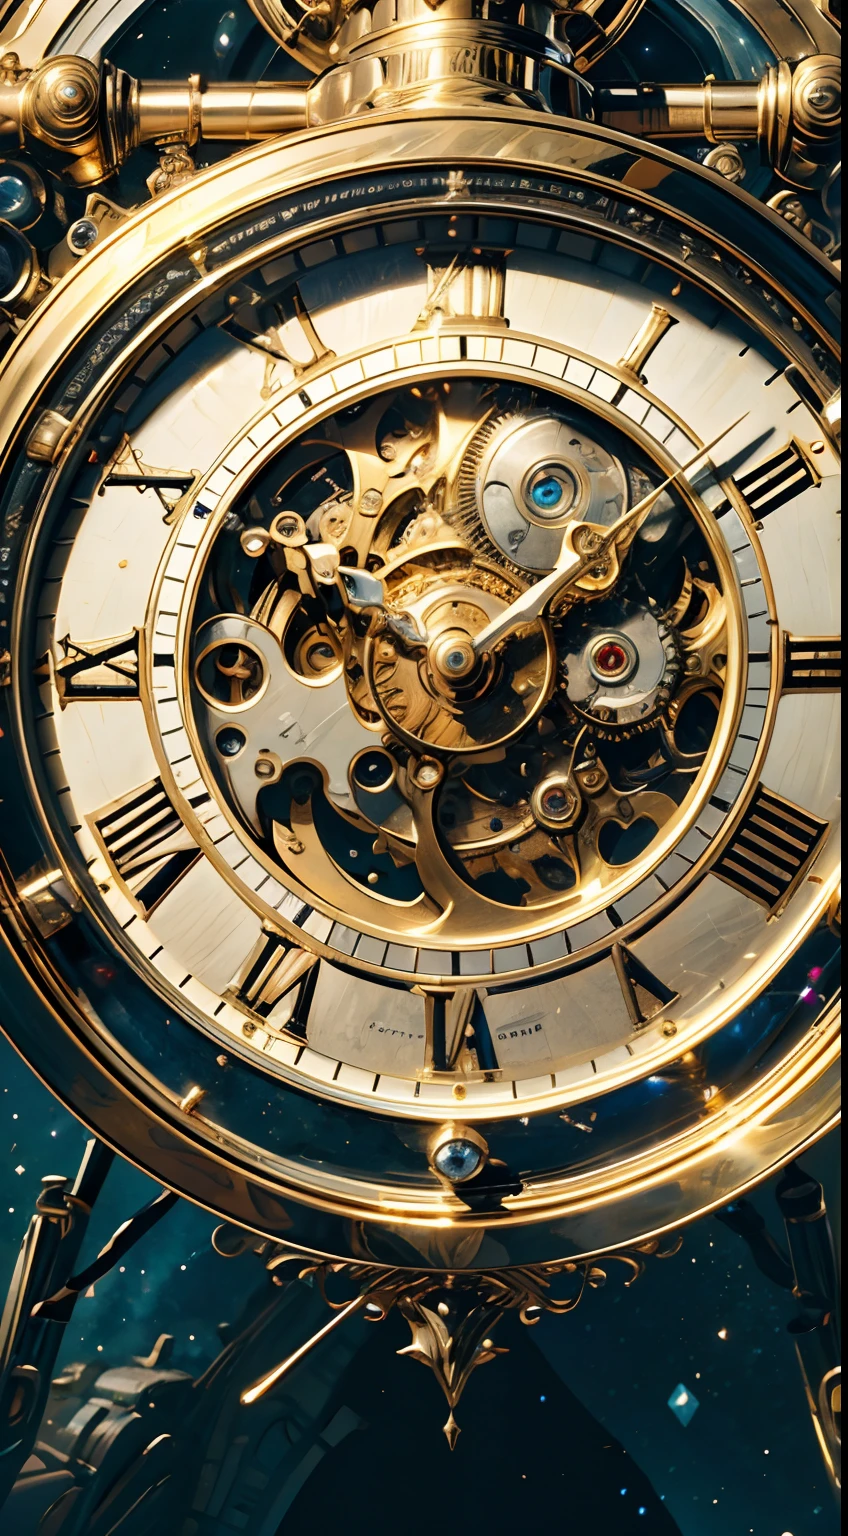 8K, 16k, Award-winning, Highest quality, Highest resolution, Super detail, High detail, Anatomically correct, Masterpiece),UHR， A clock in the starry sky，The timekeeping mechanism of the future, delicate craftsmanship , A legendary mechanical clock, Rare and precious, Intricate details, Smart clocks are made of a metal called orichalcum, There are no gemstones, (The inside of the mechanical clock is engraved with ancient characters: 1.2), Impeccable, Platinum, White, Gold and silver, Mysterious starry sky，cyber punk perssonage，high - tech，hyper realisitc，Sci-fi dreams